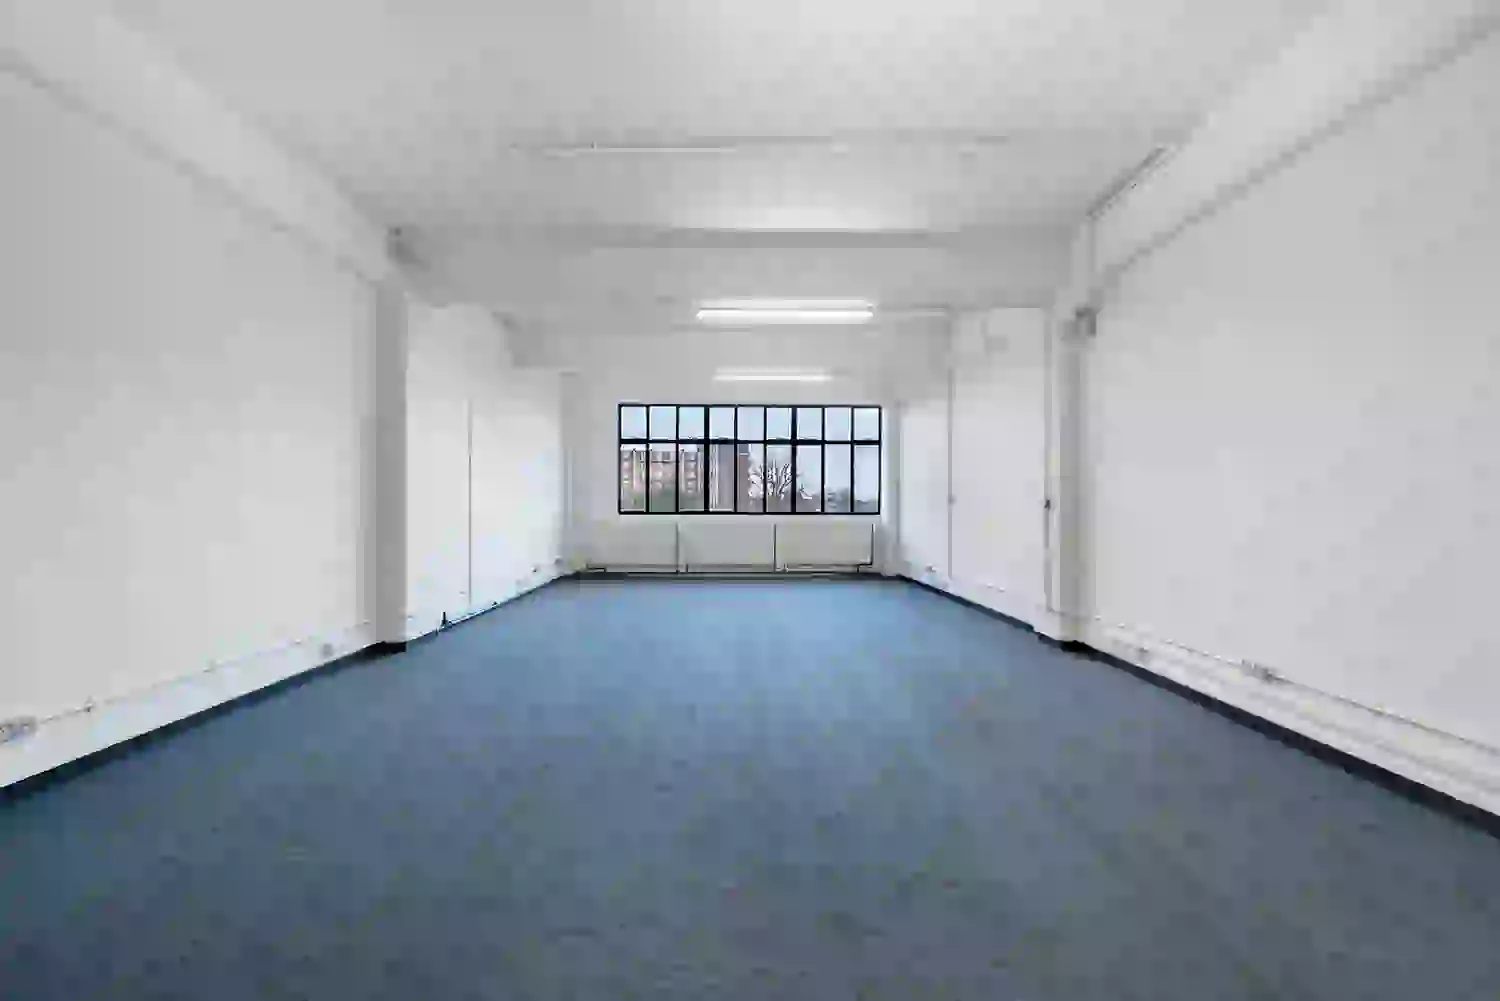 Office space to rent at Leroy House, 436 Essex Road, London, unit LY3M, 620 sq ft (57 sq m).